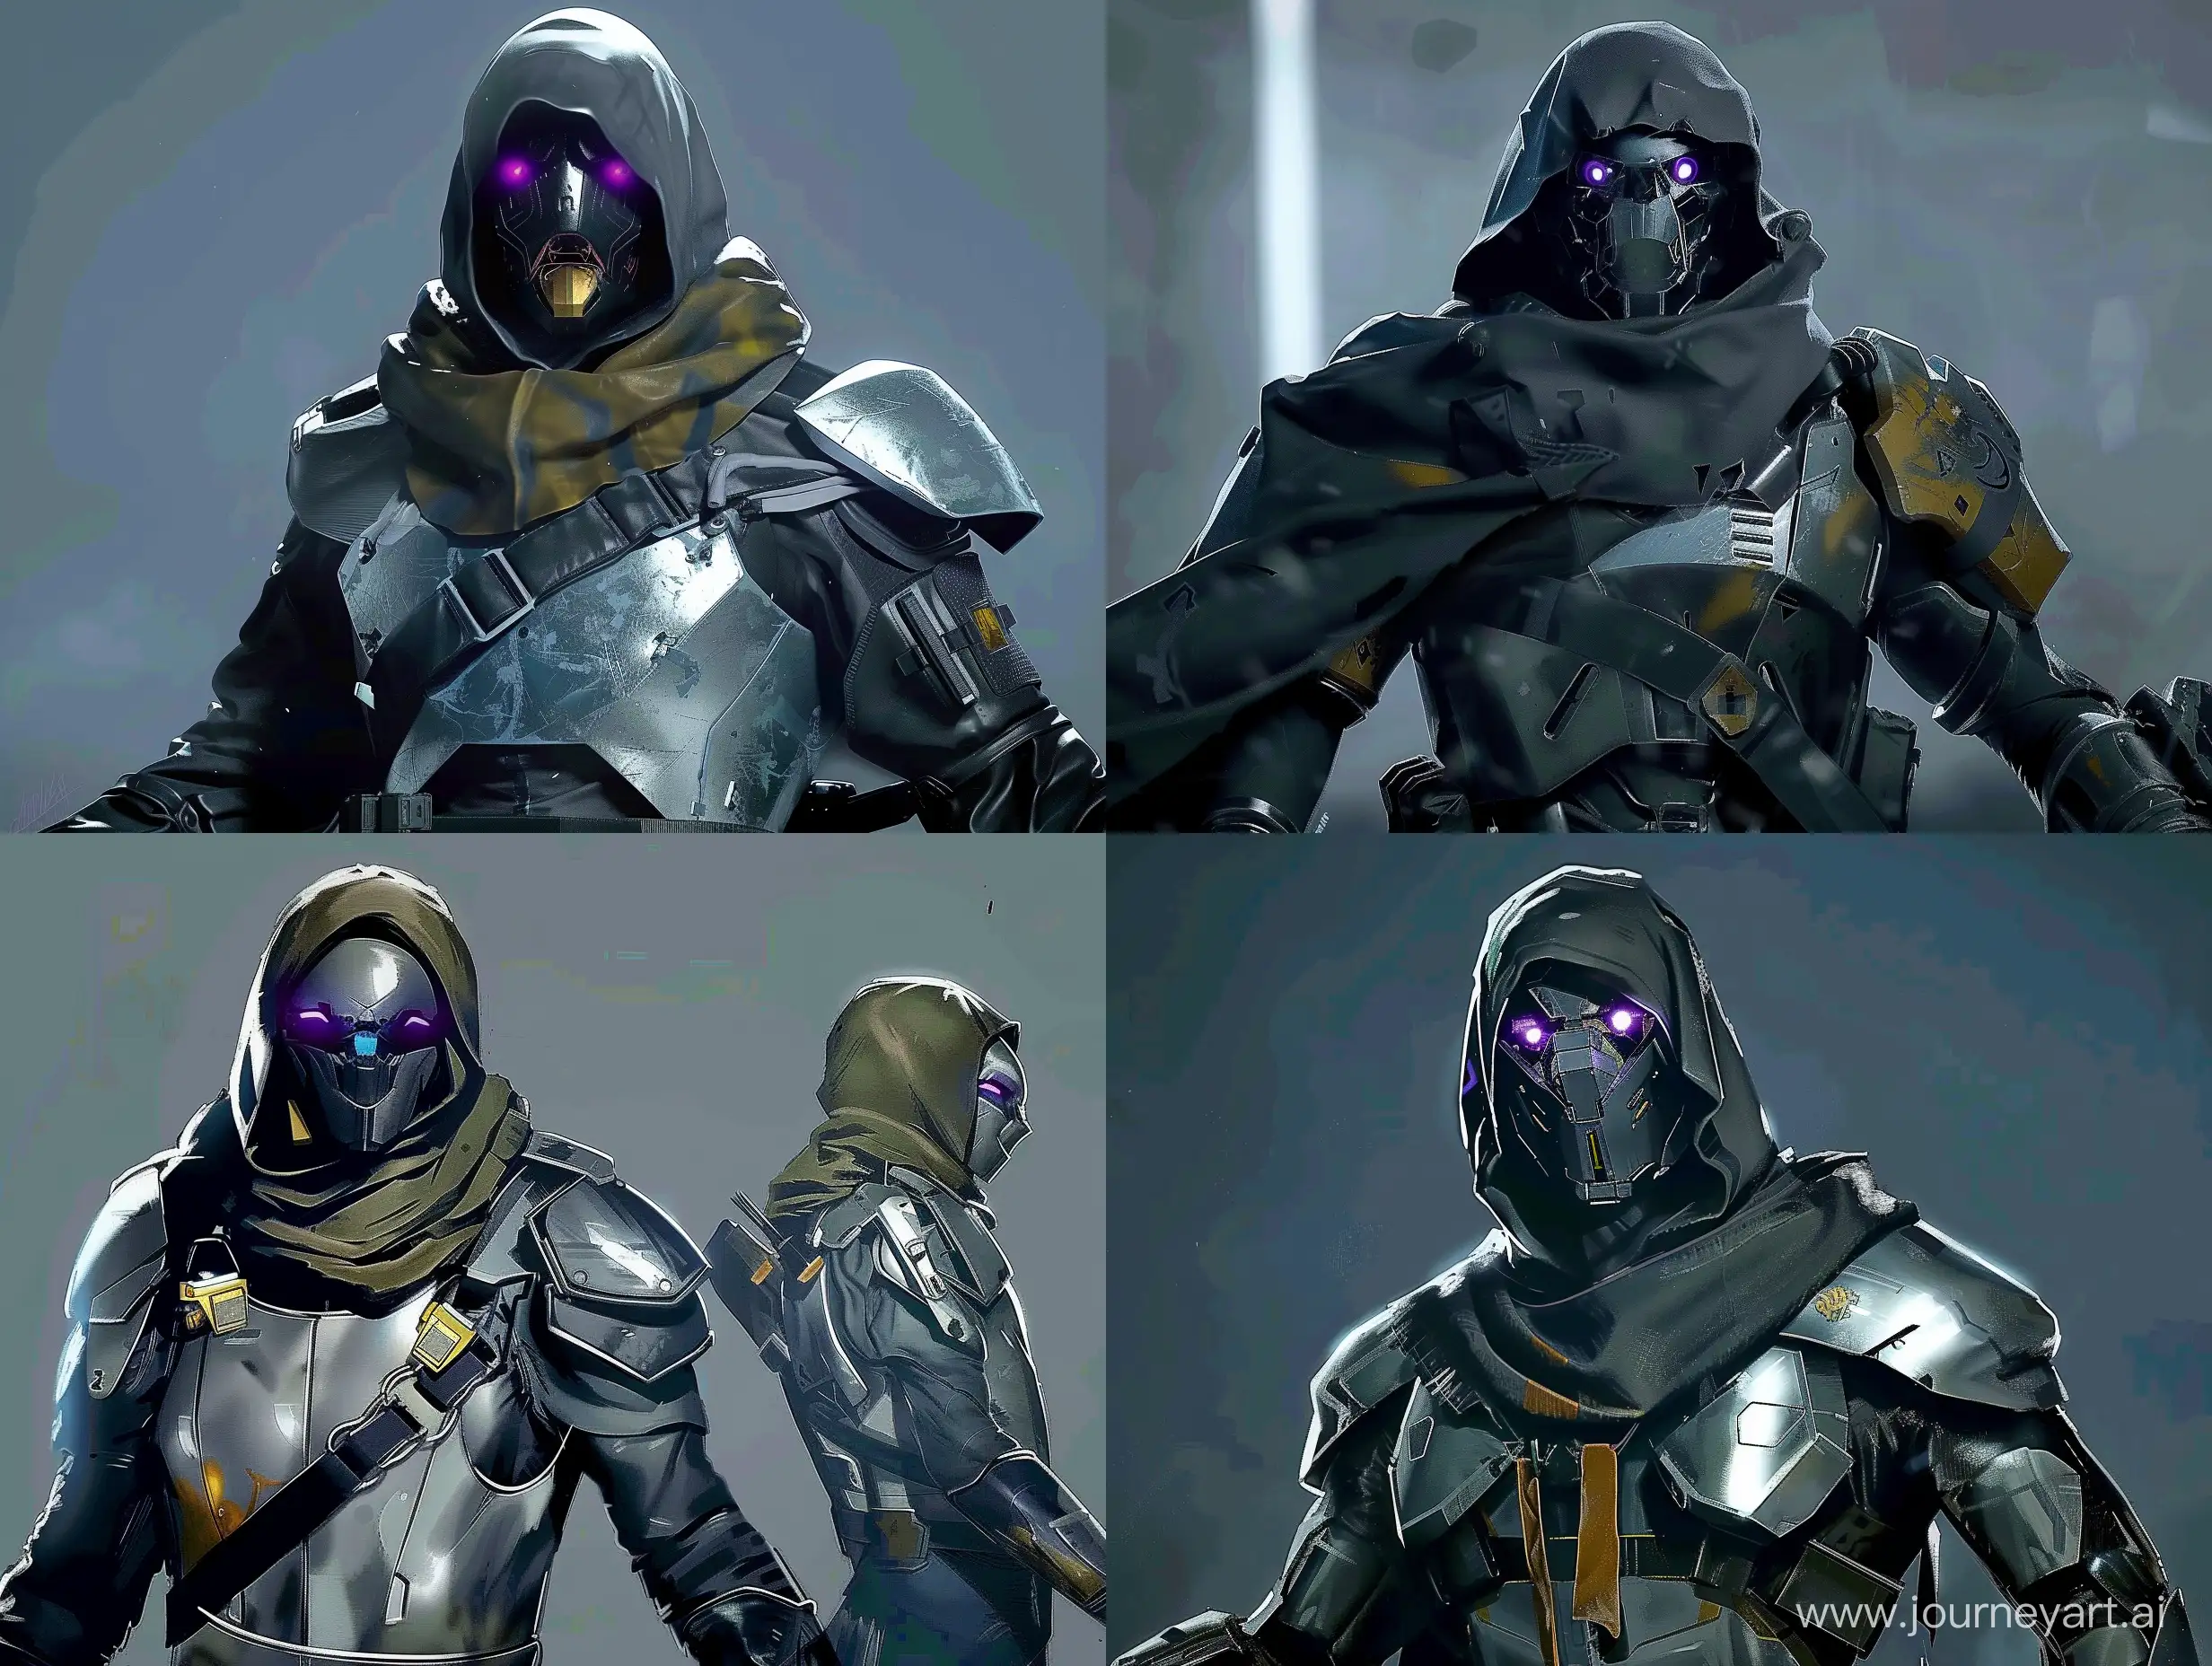 Futuristic-SciFi-Warrior-in-Shredder-Armor-with-Purple-Eyes-and-Silver-Tactical-Suit